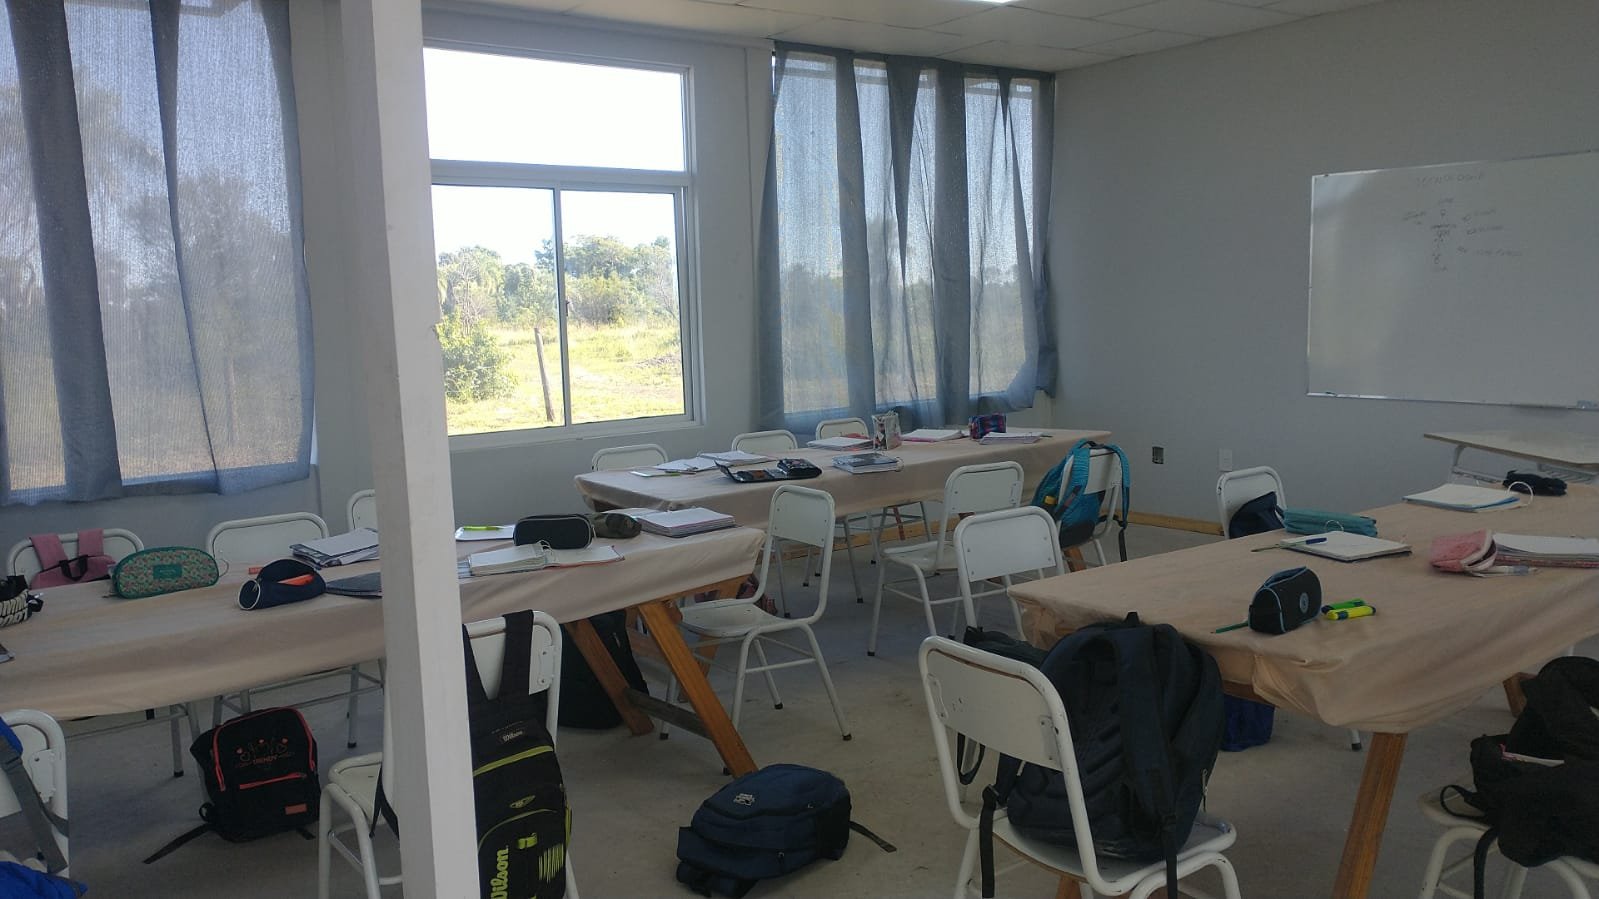  Finished Classroom 